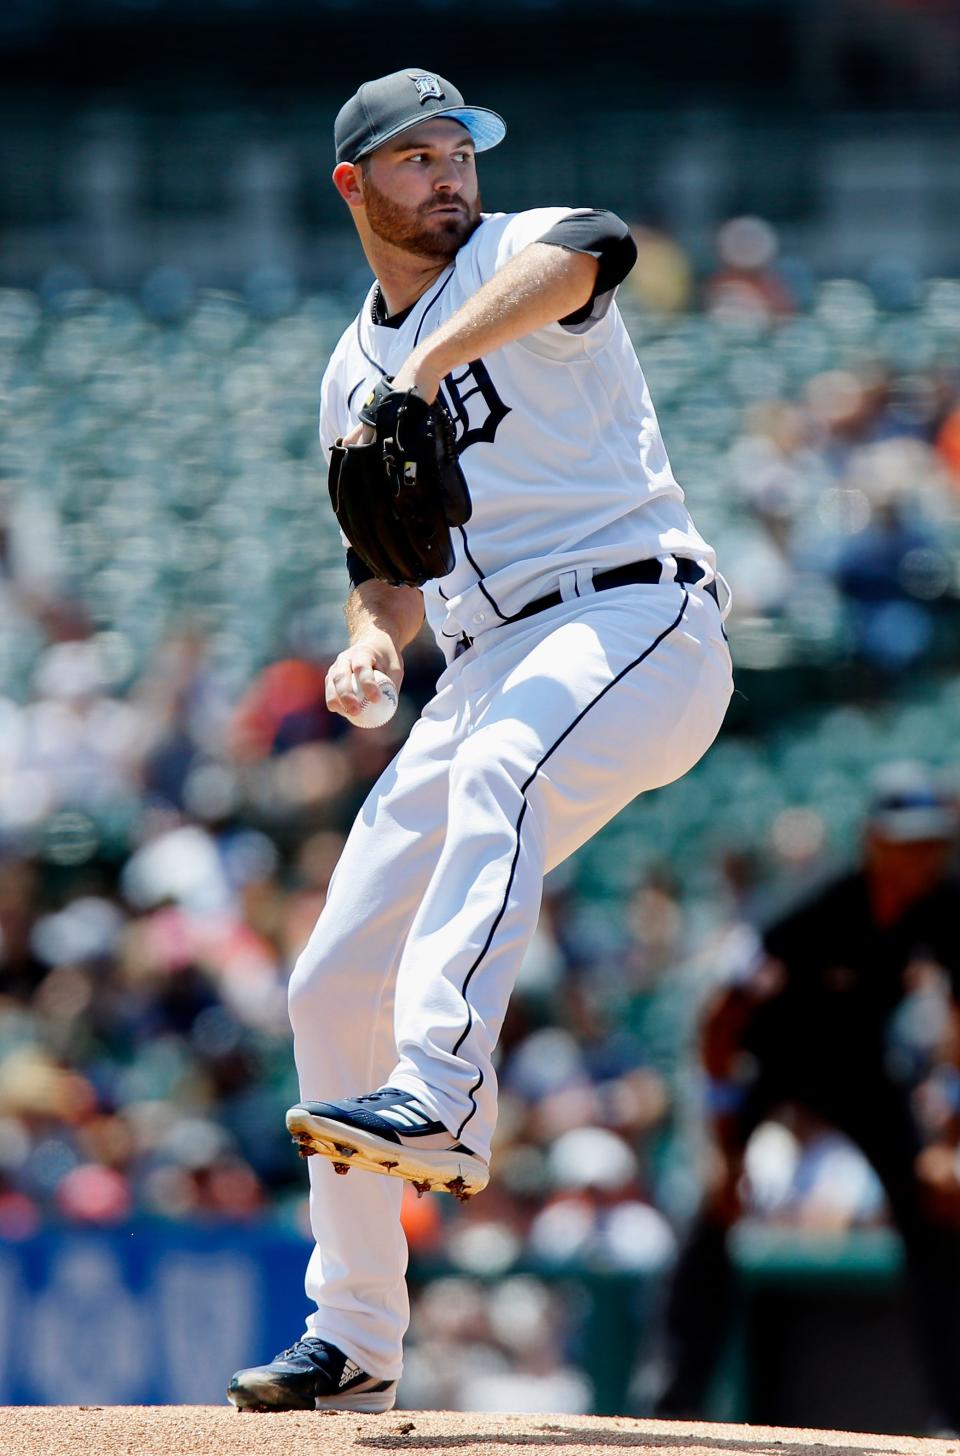 Drew Hutchison (40) of the Detroit Tigers pitches against the Texas Rangers during the first inning at Comerica Park on June 19, 2022, in Detroit, Michigan.